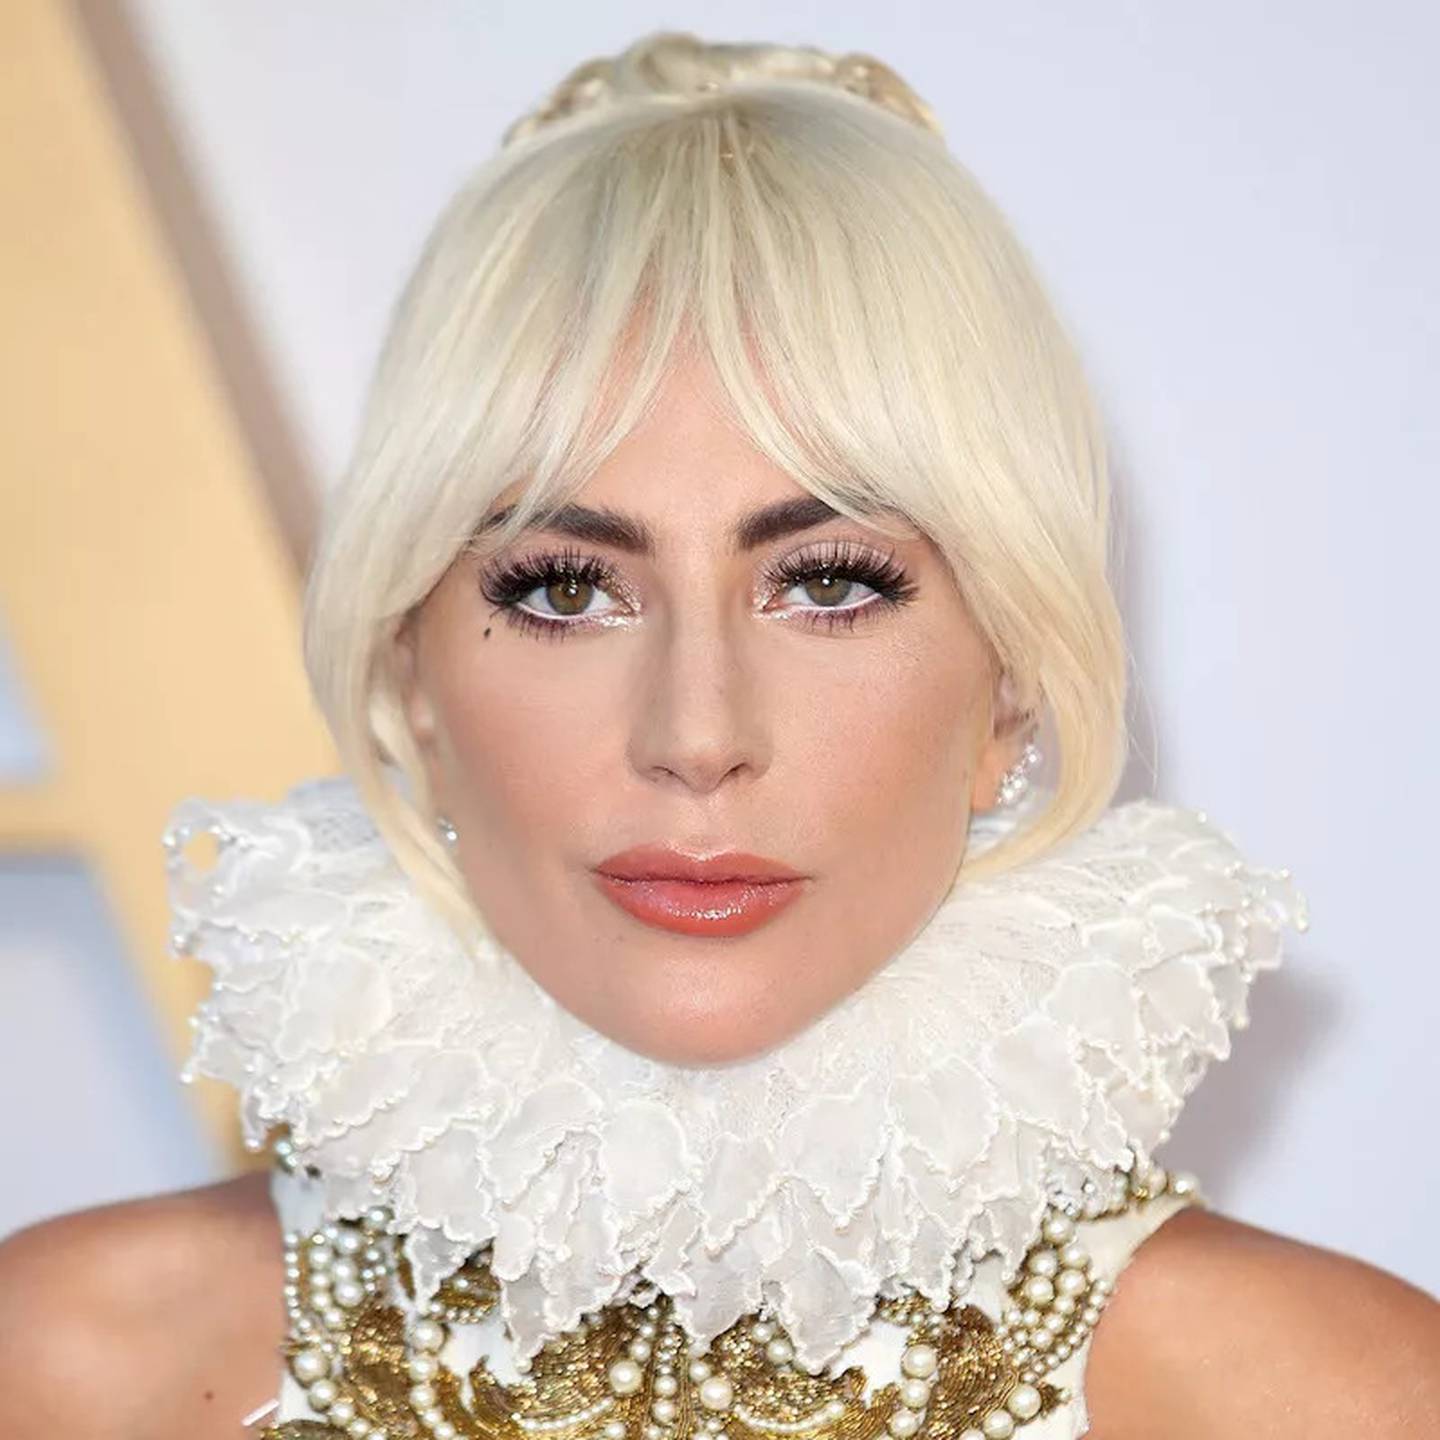 Lady Gaga sporting the white eyeliner trend. Getty Images